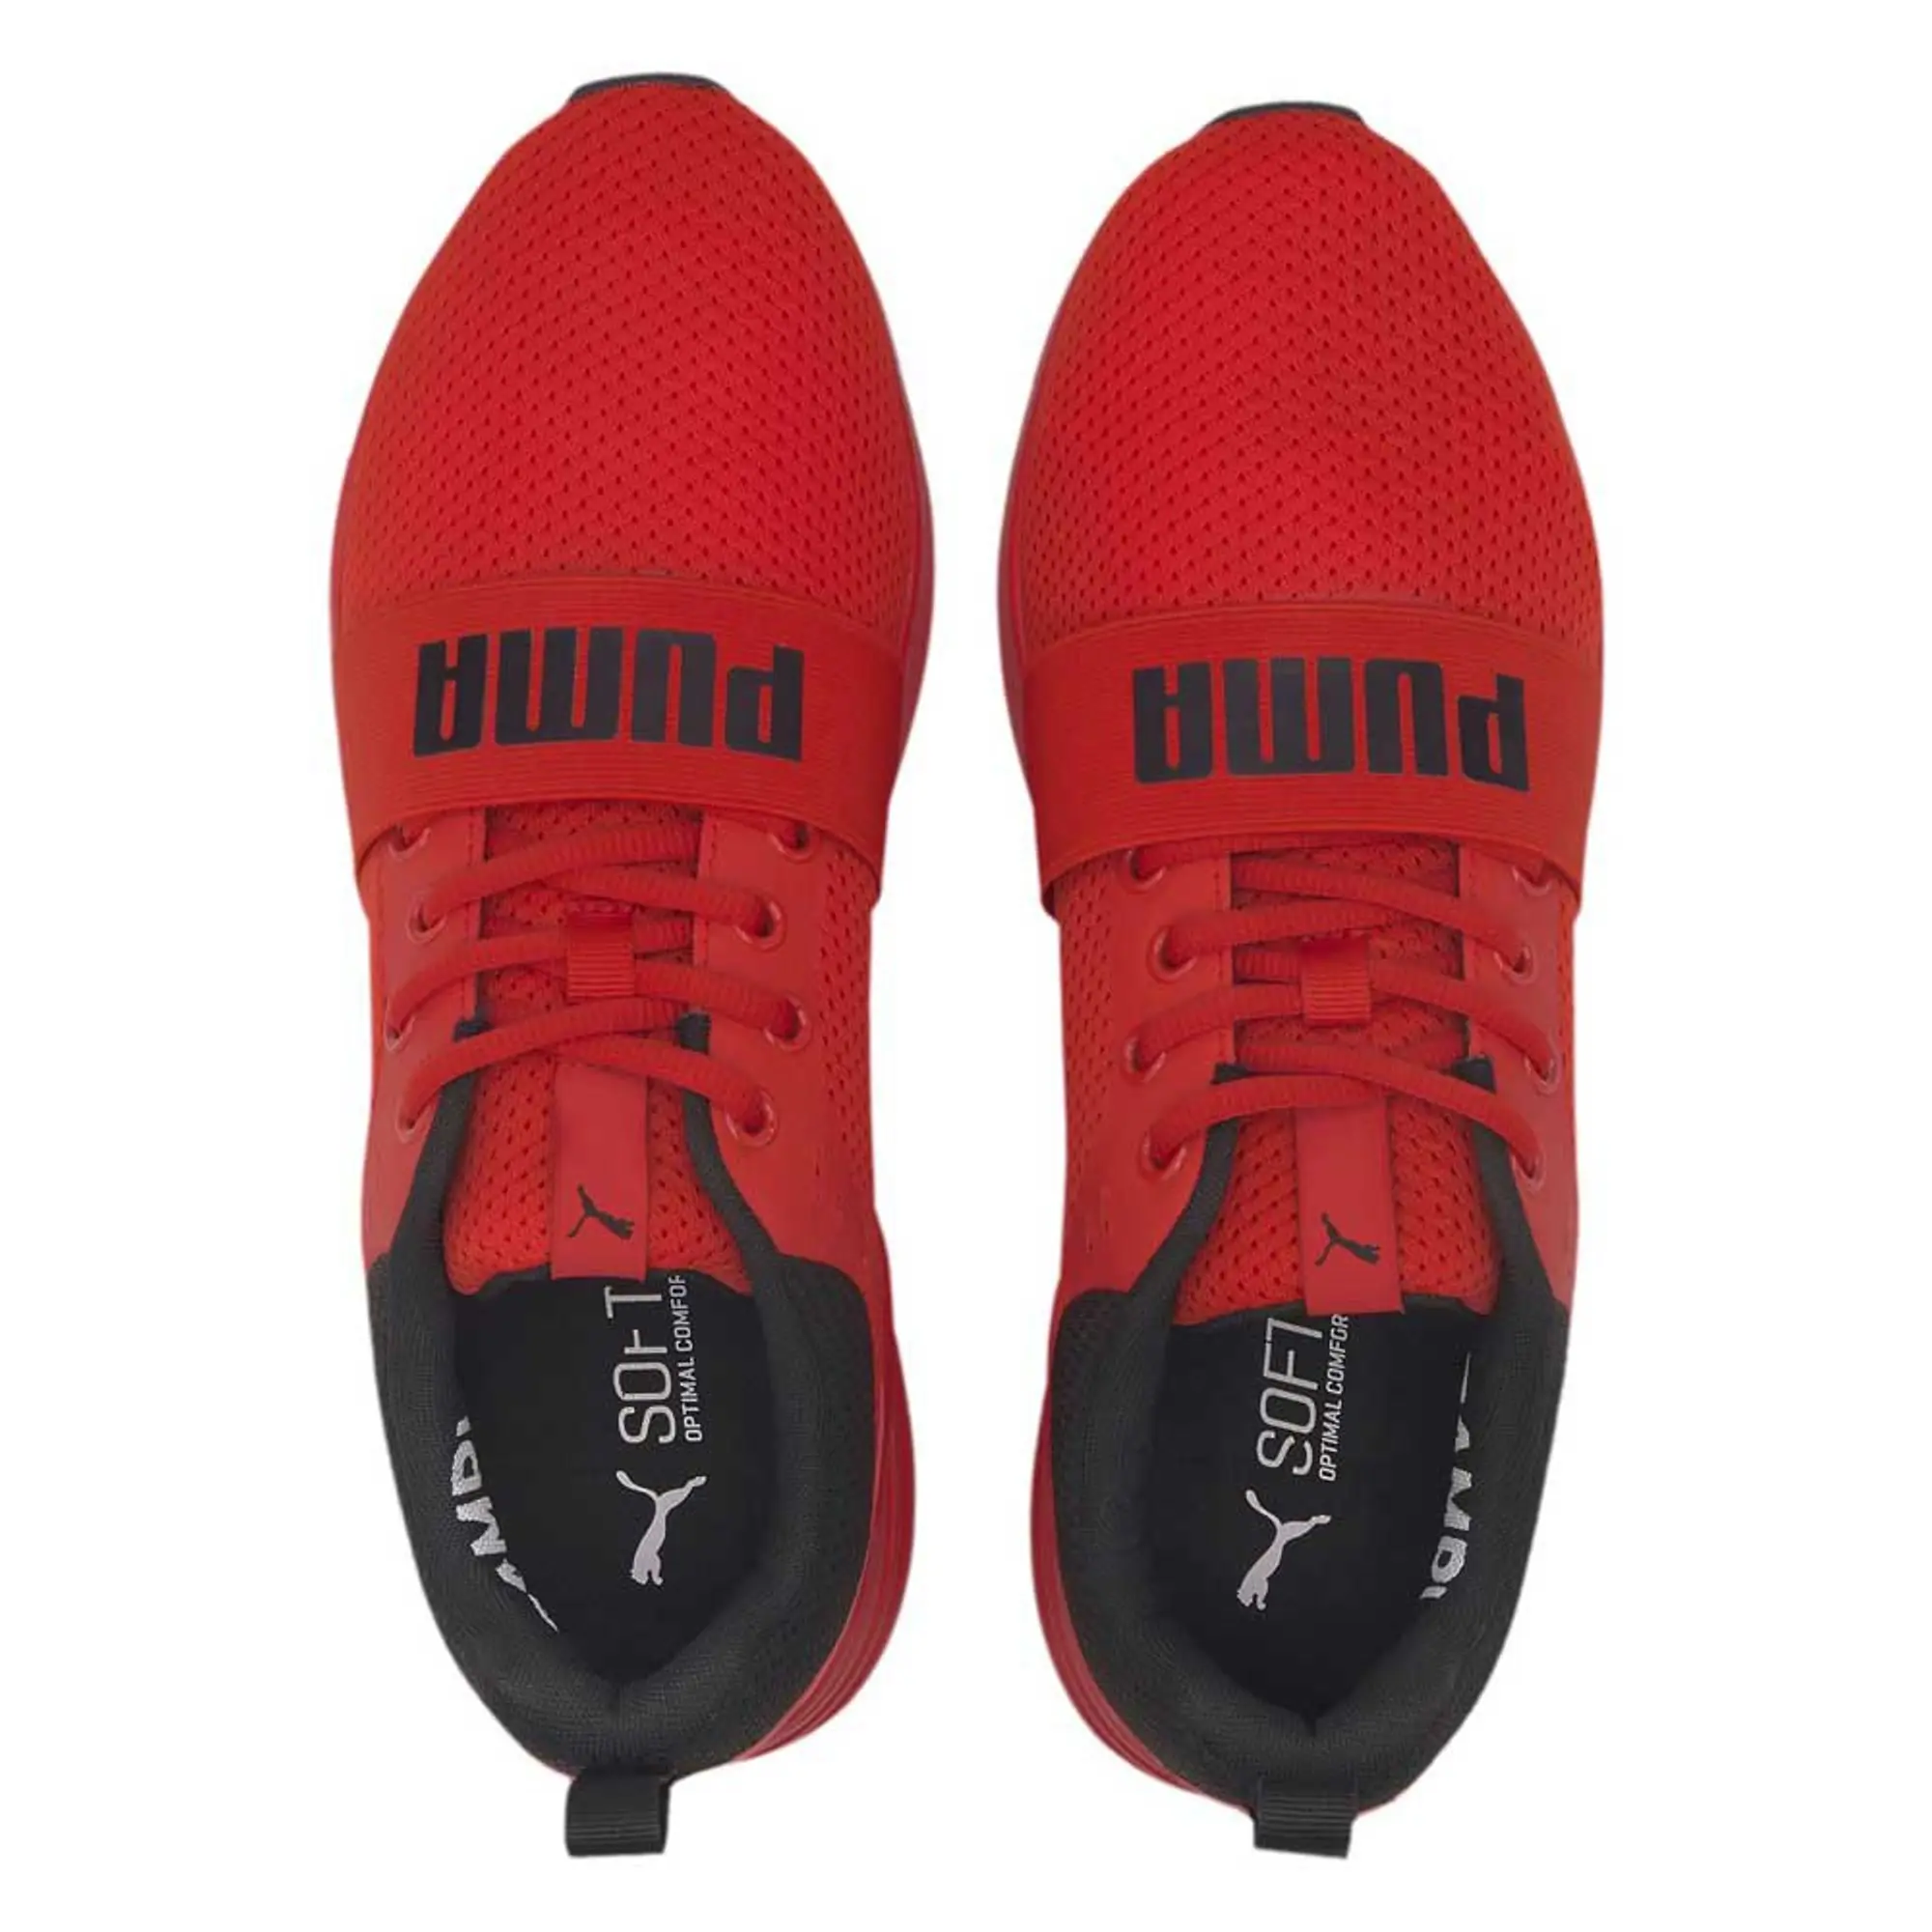 PUMA Women's Wired Trainers, High Risk Red/Black